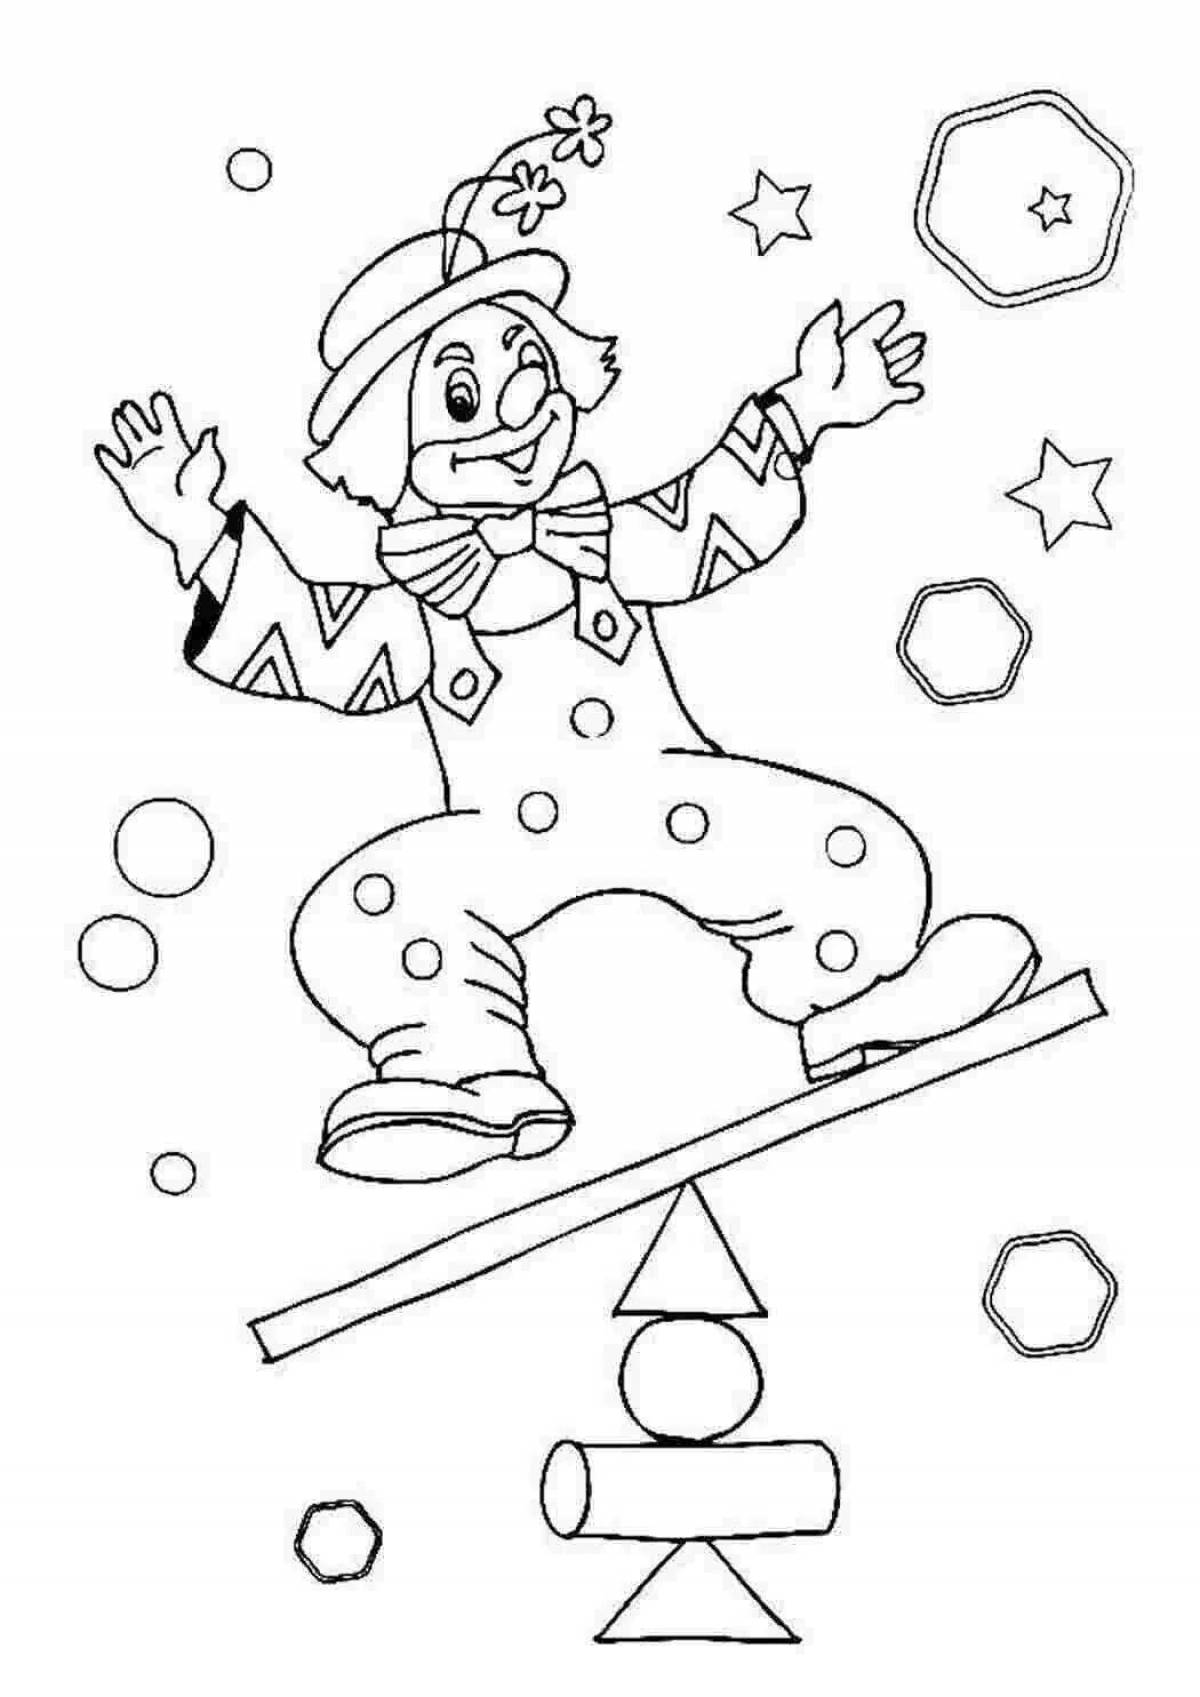 Humorous clown coloring for children 6-7 years old